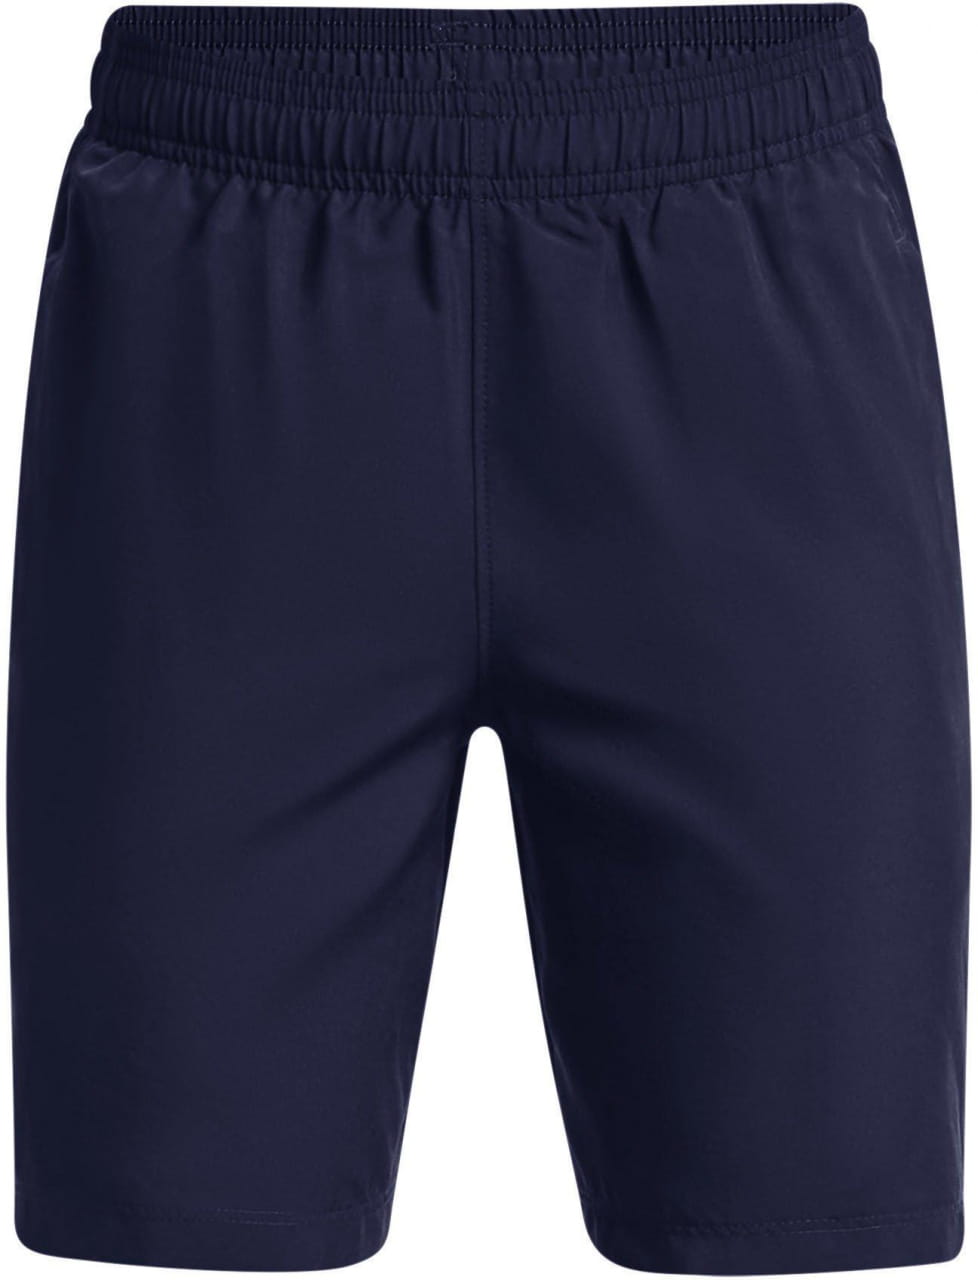 Shorts für Kinder Under Armour Woven Graphic Shorts-NVY